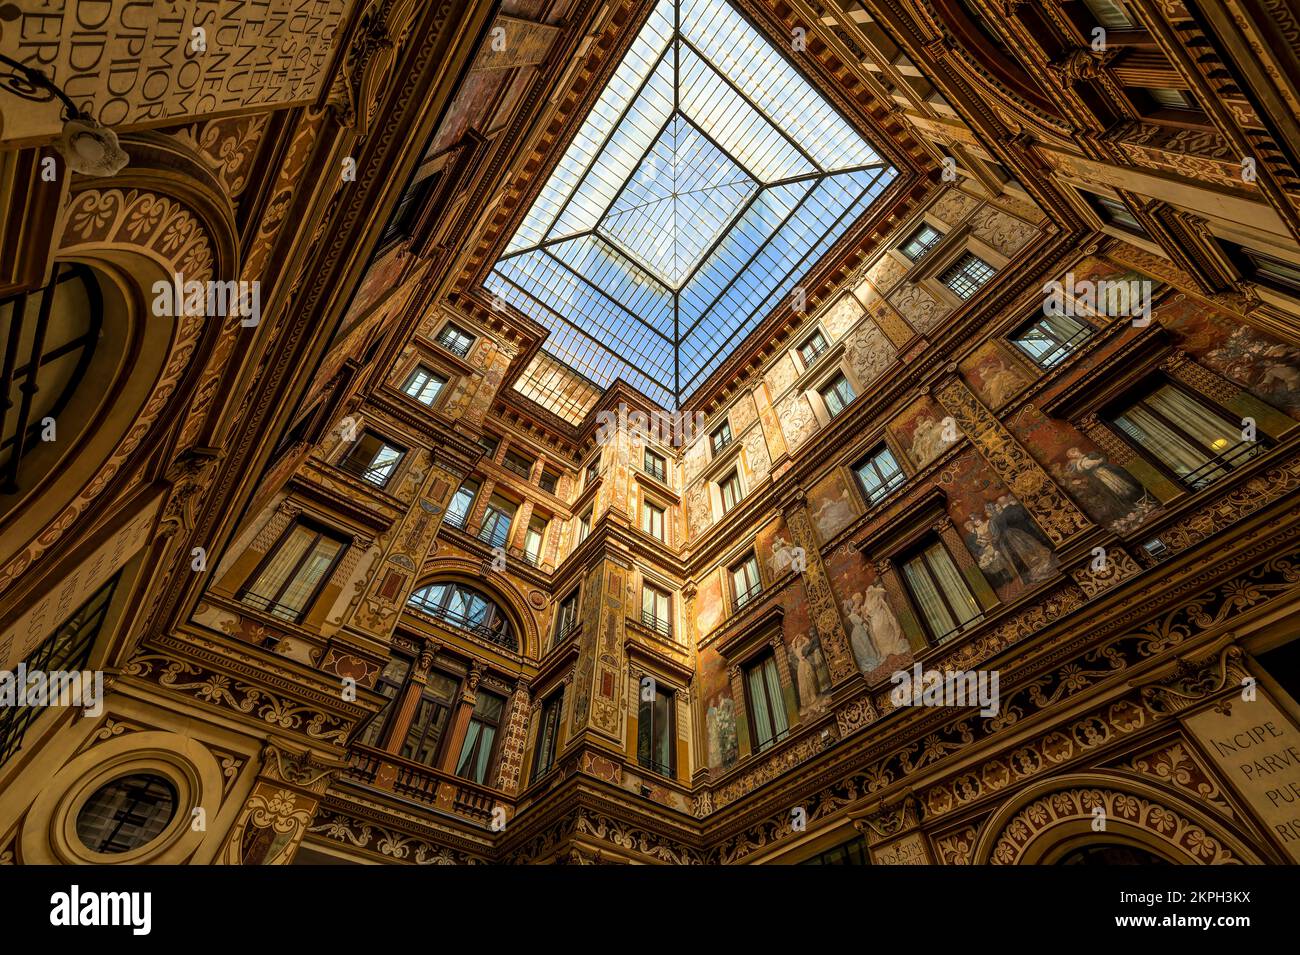 Low angle view of the Galleria Sciarra in Rome, Italy. Stock Photo